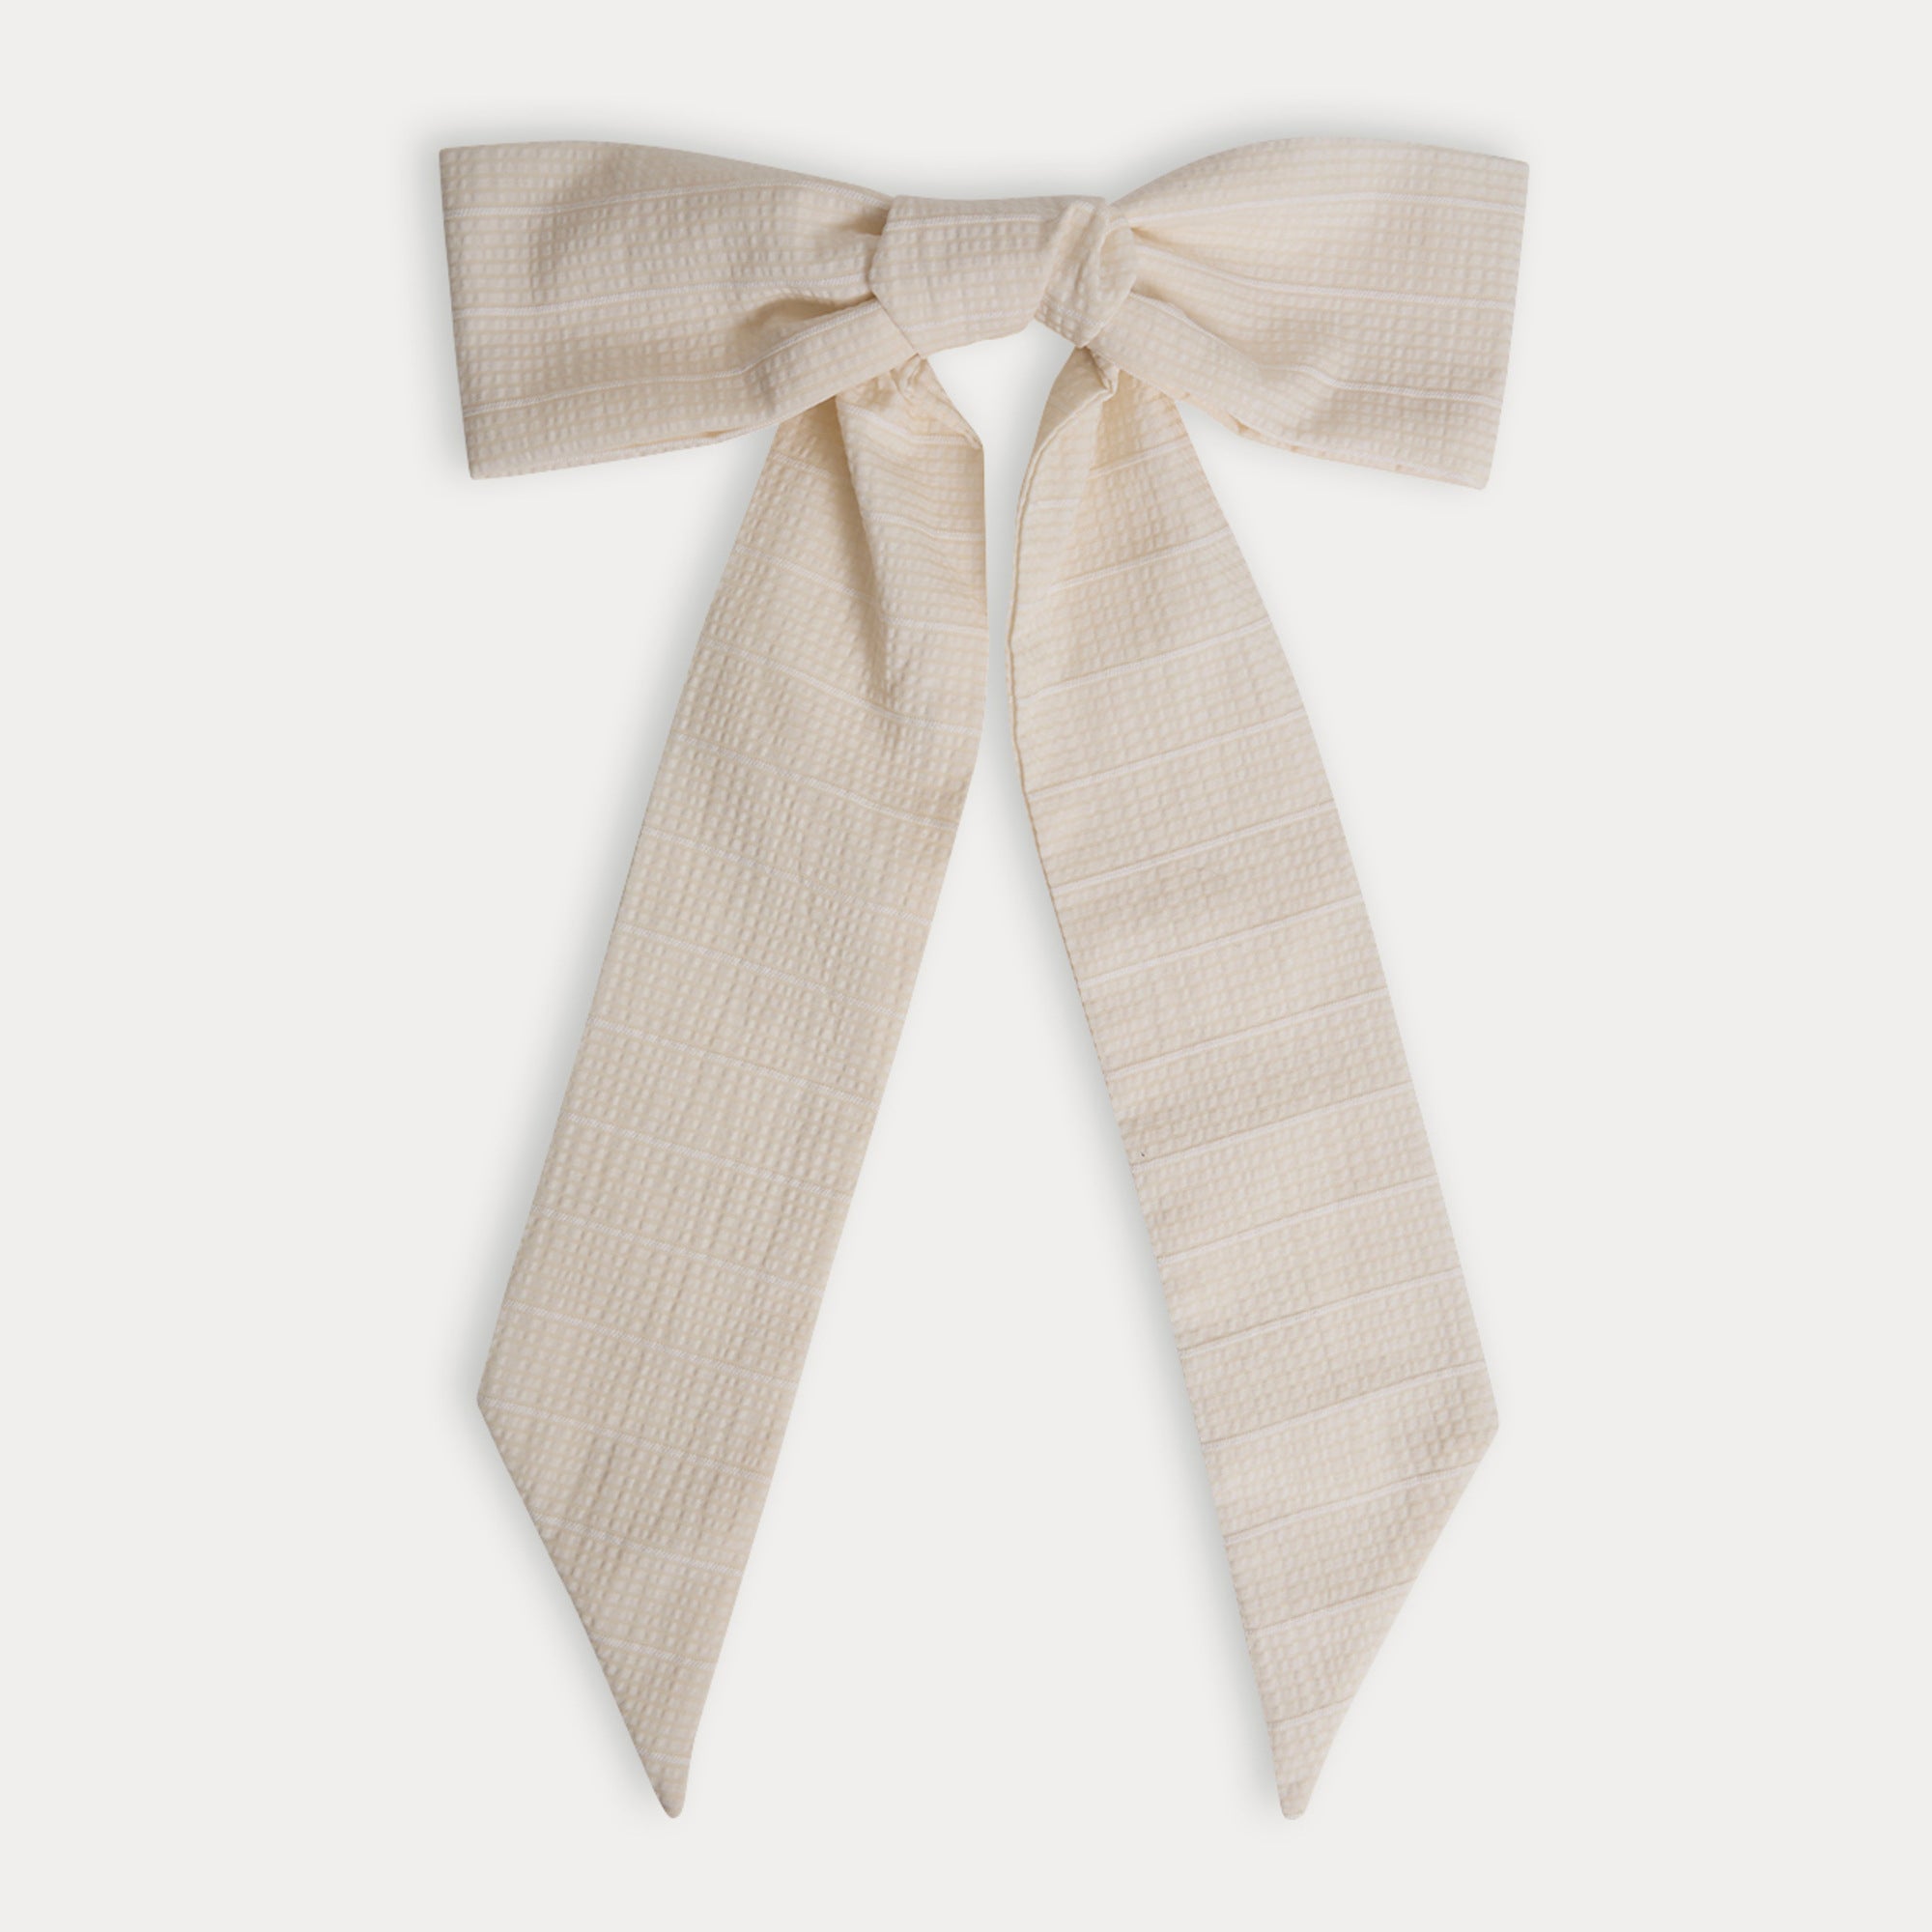 Girls Ivory Bow Hair Clips